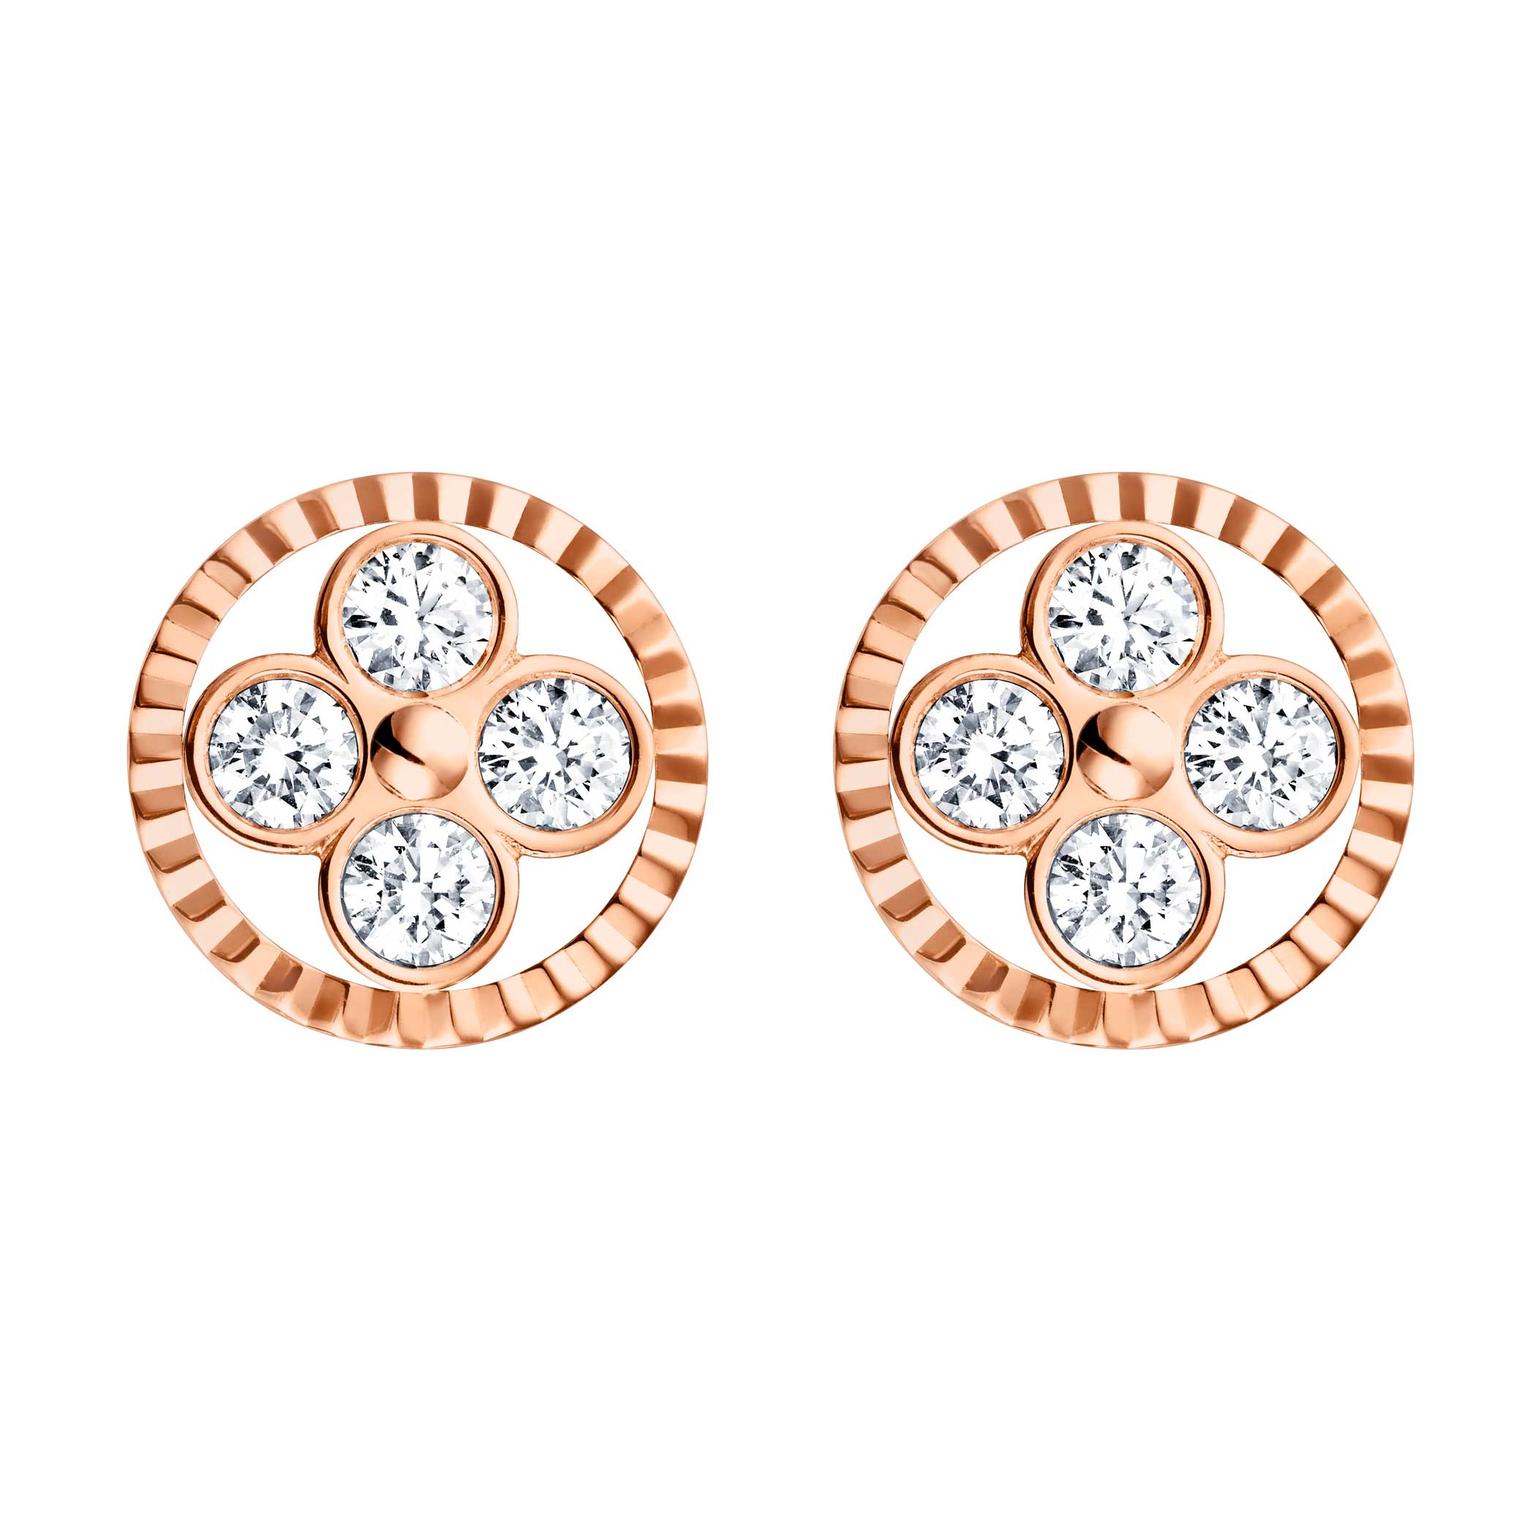 Louis Vuitton Monogram Sun and Stars collection Sun earrings in rose gold_zoom